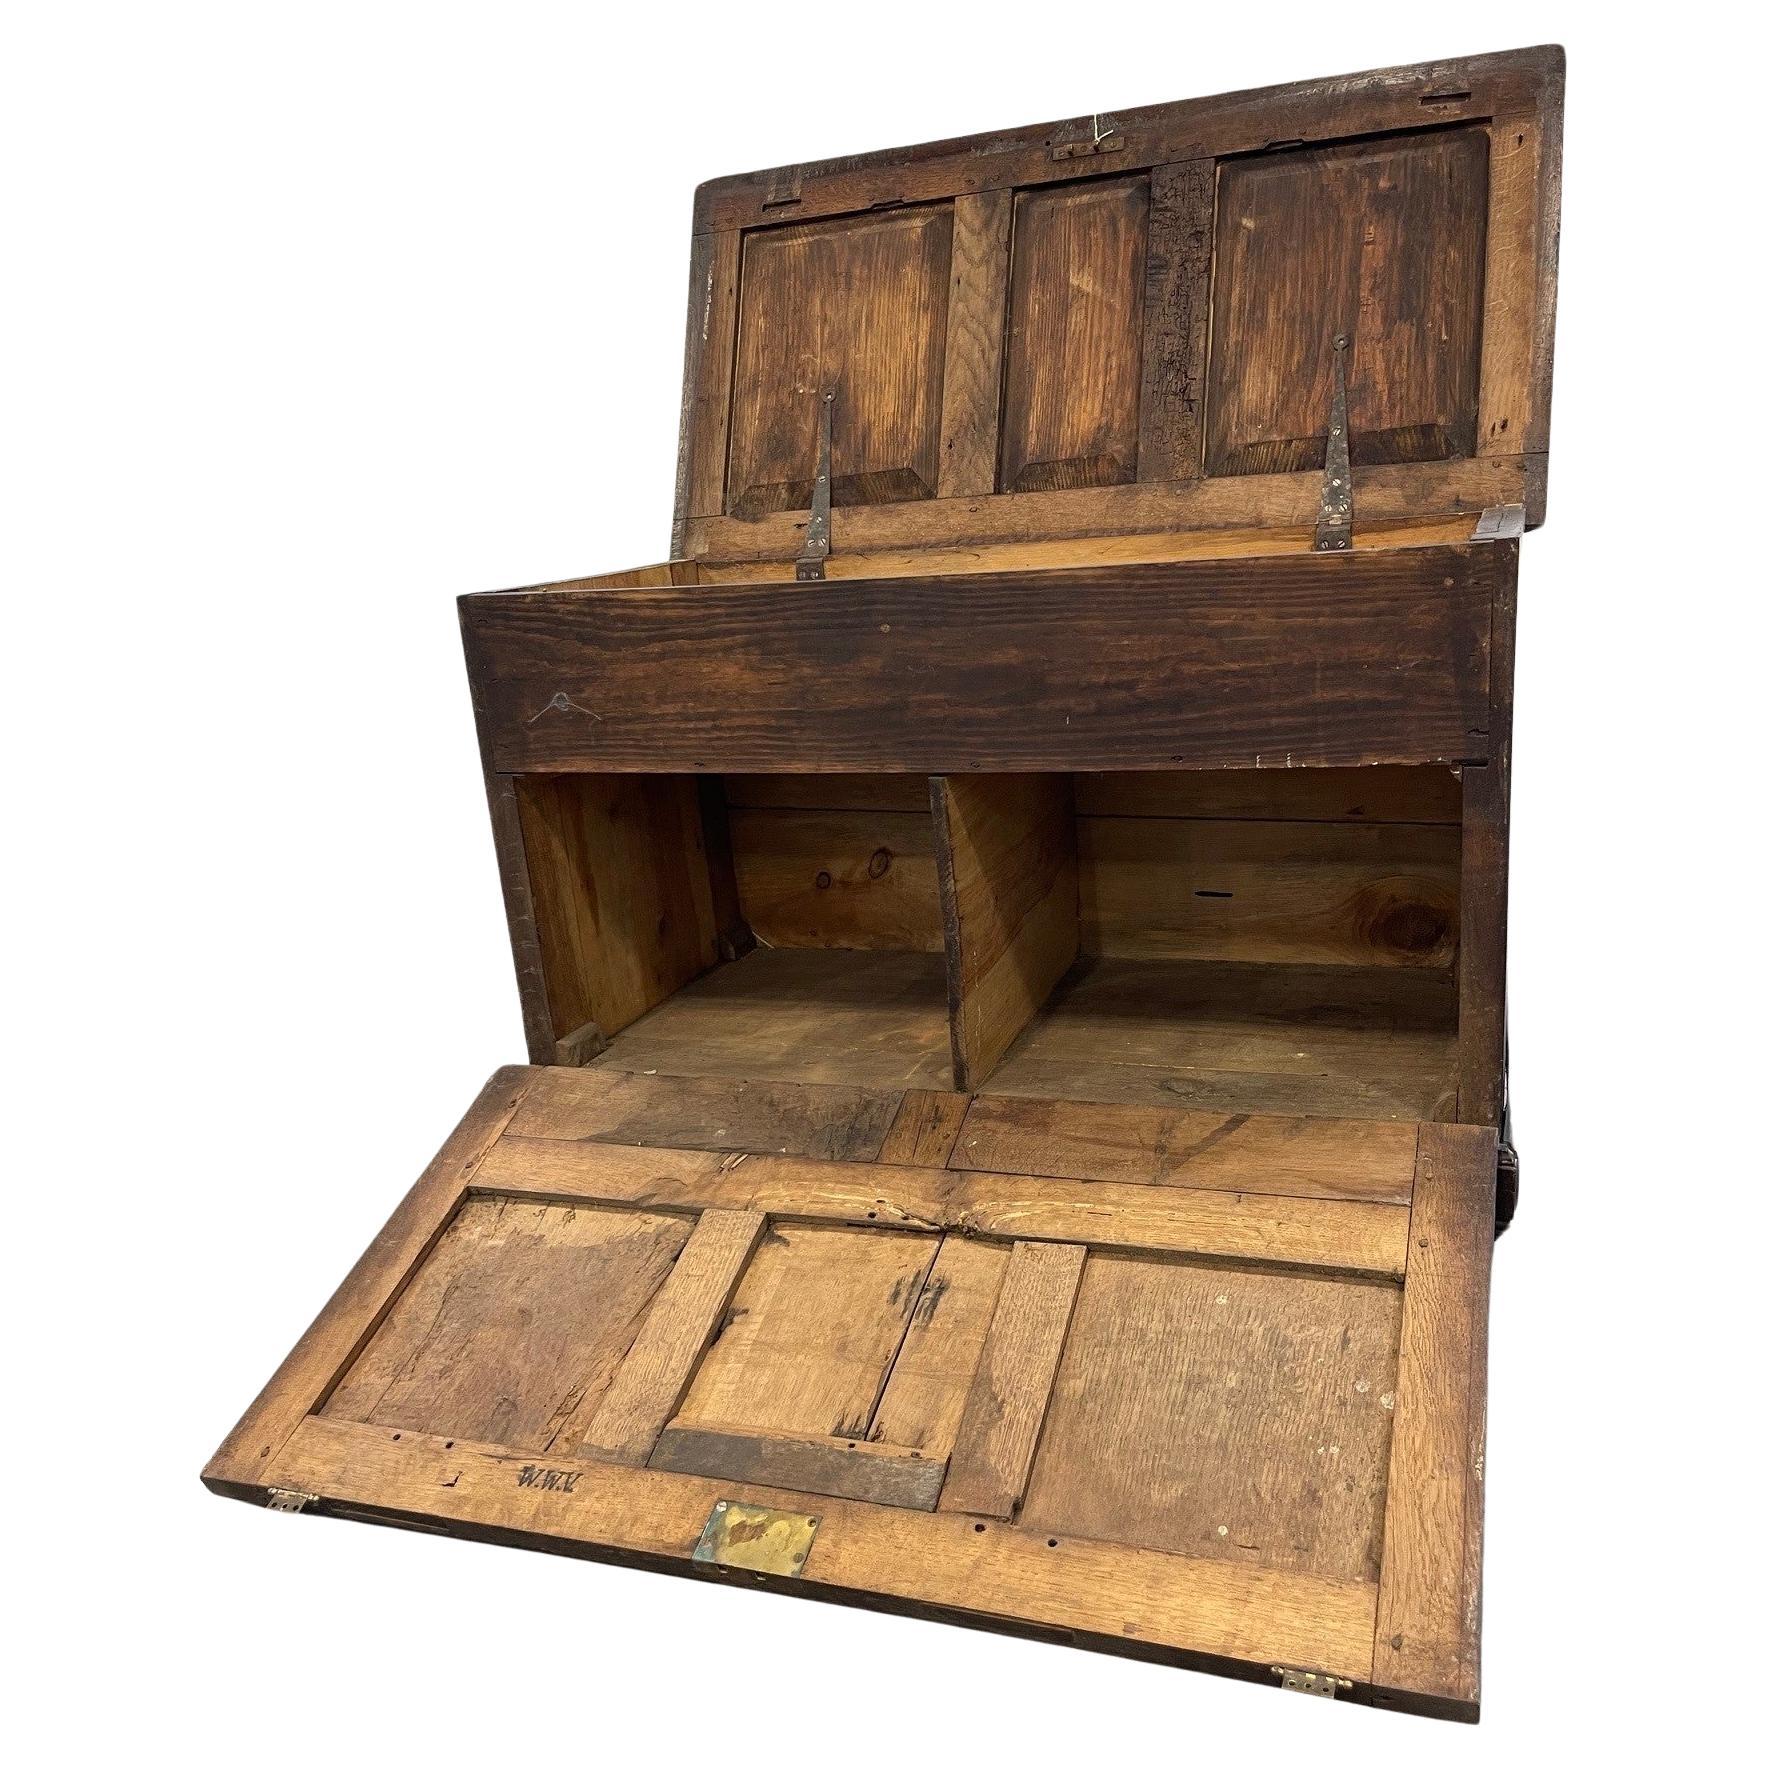 Late 17th Century Case Pieces and Storage Cabinets